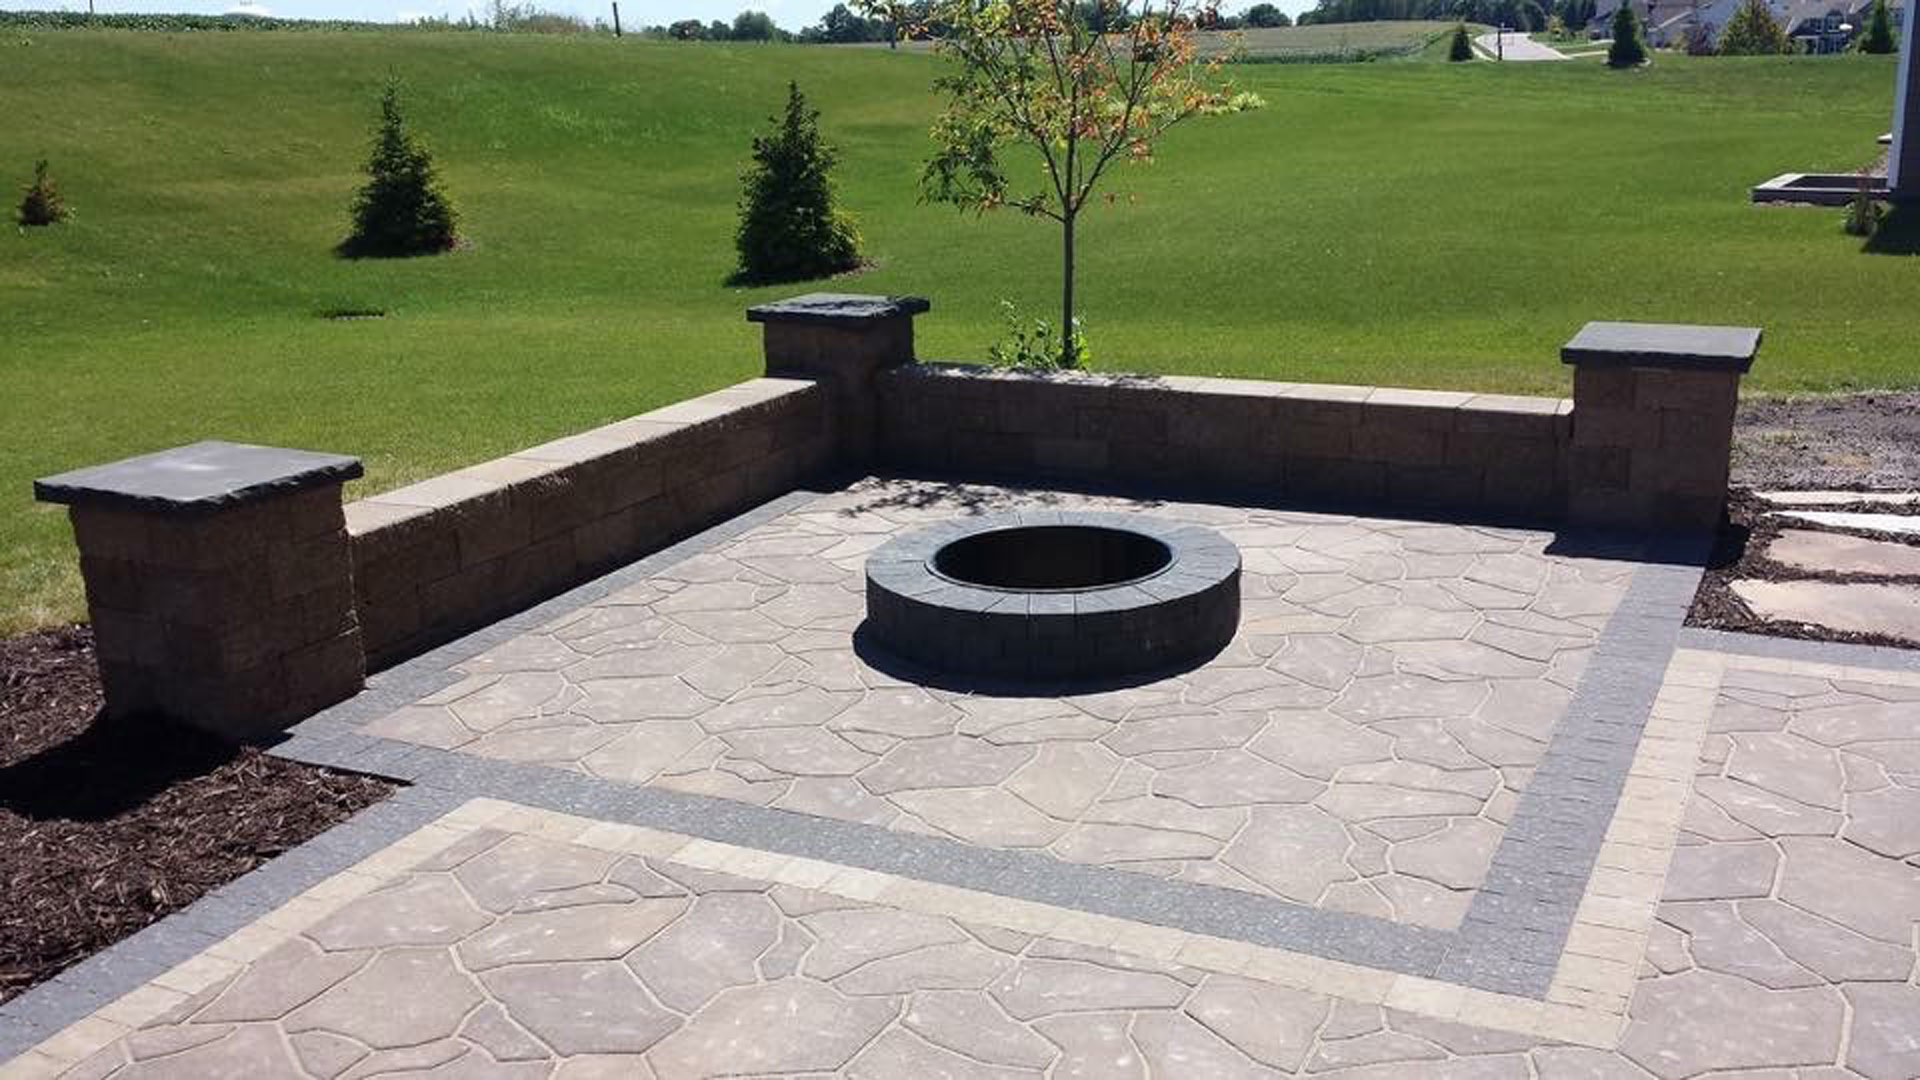 Fire pit, patio, and seating wall installed for landscape in Johnston, IA.